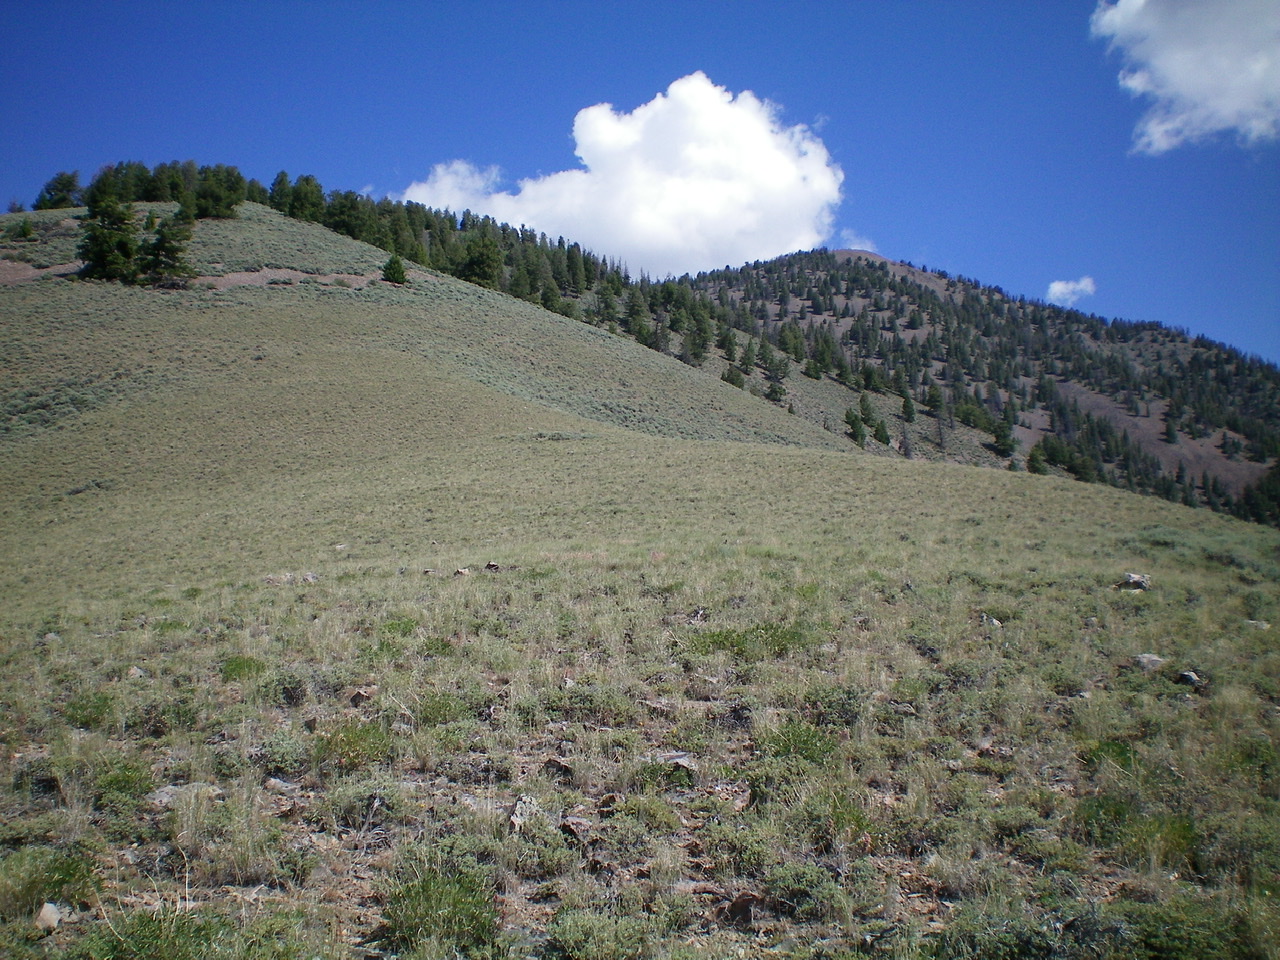 The South Ridge of Peak 9366 as viewed from the sagebrush slope of the lower South Ridge. The summit is right of center. Livingston Douglas Photos 